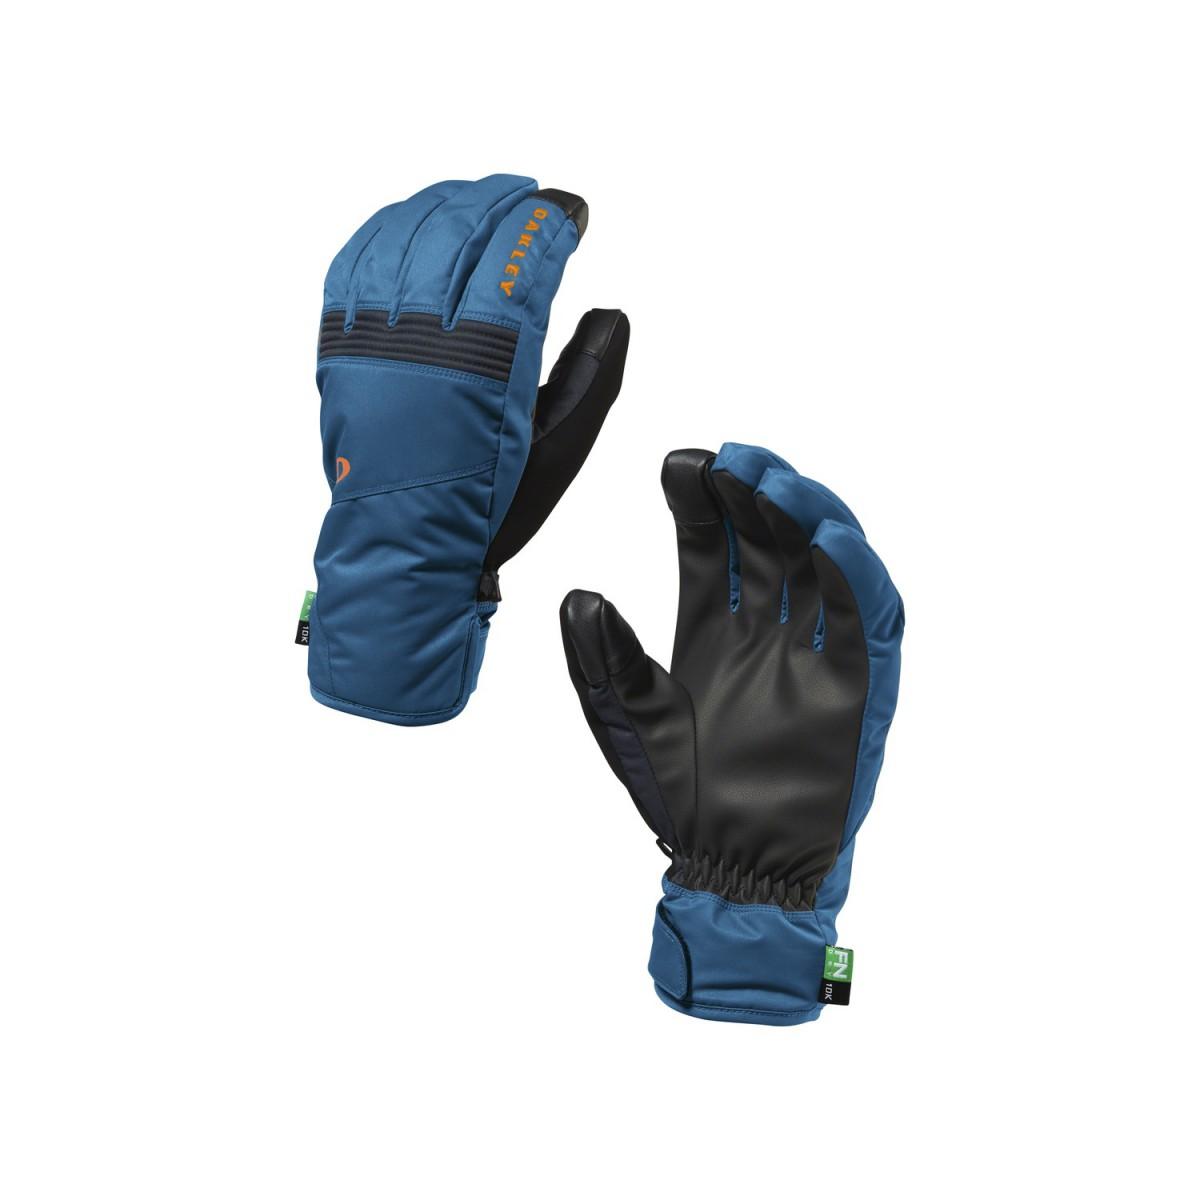 Roundhouse Short Glove